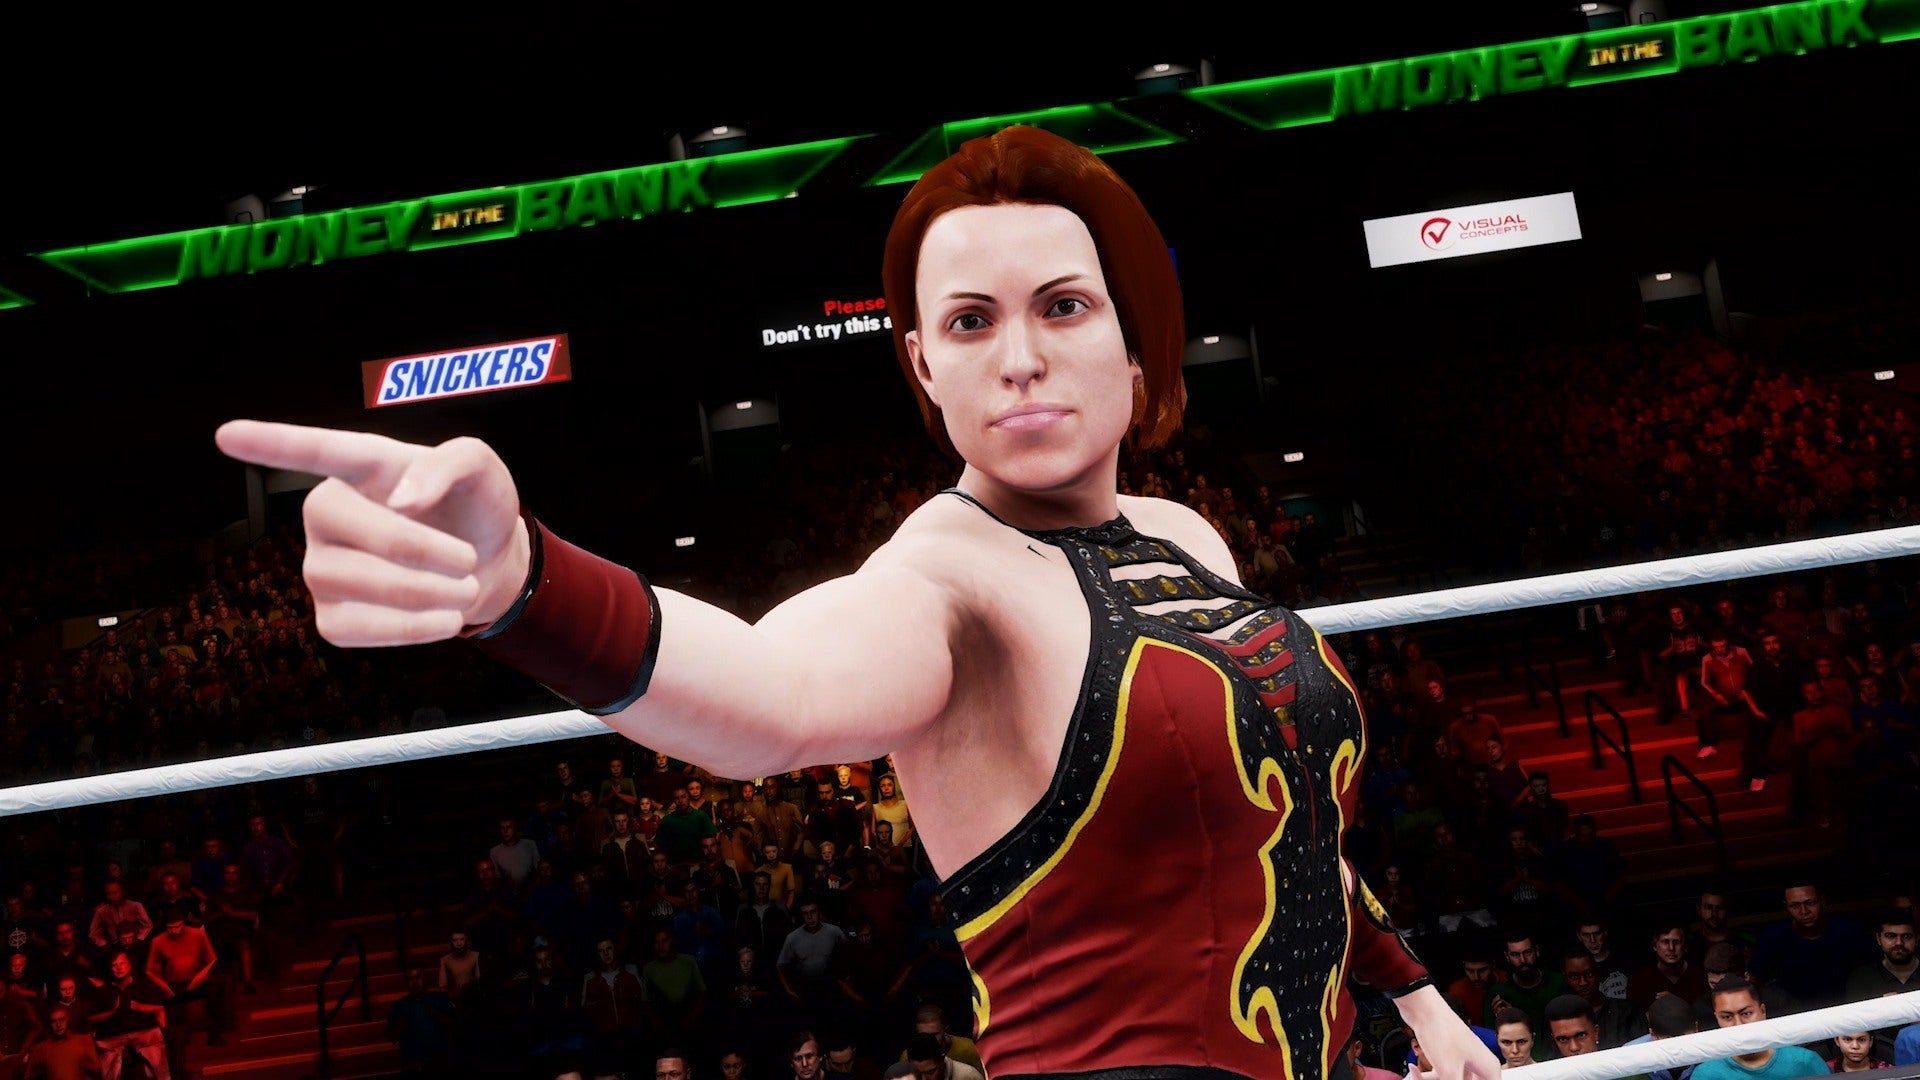 WWE Says There's No WWE 2K21